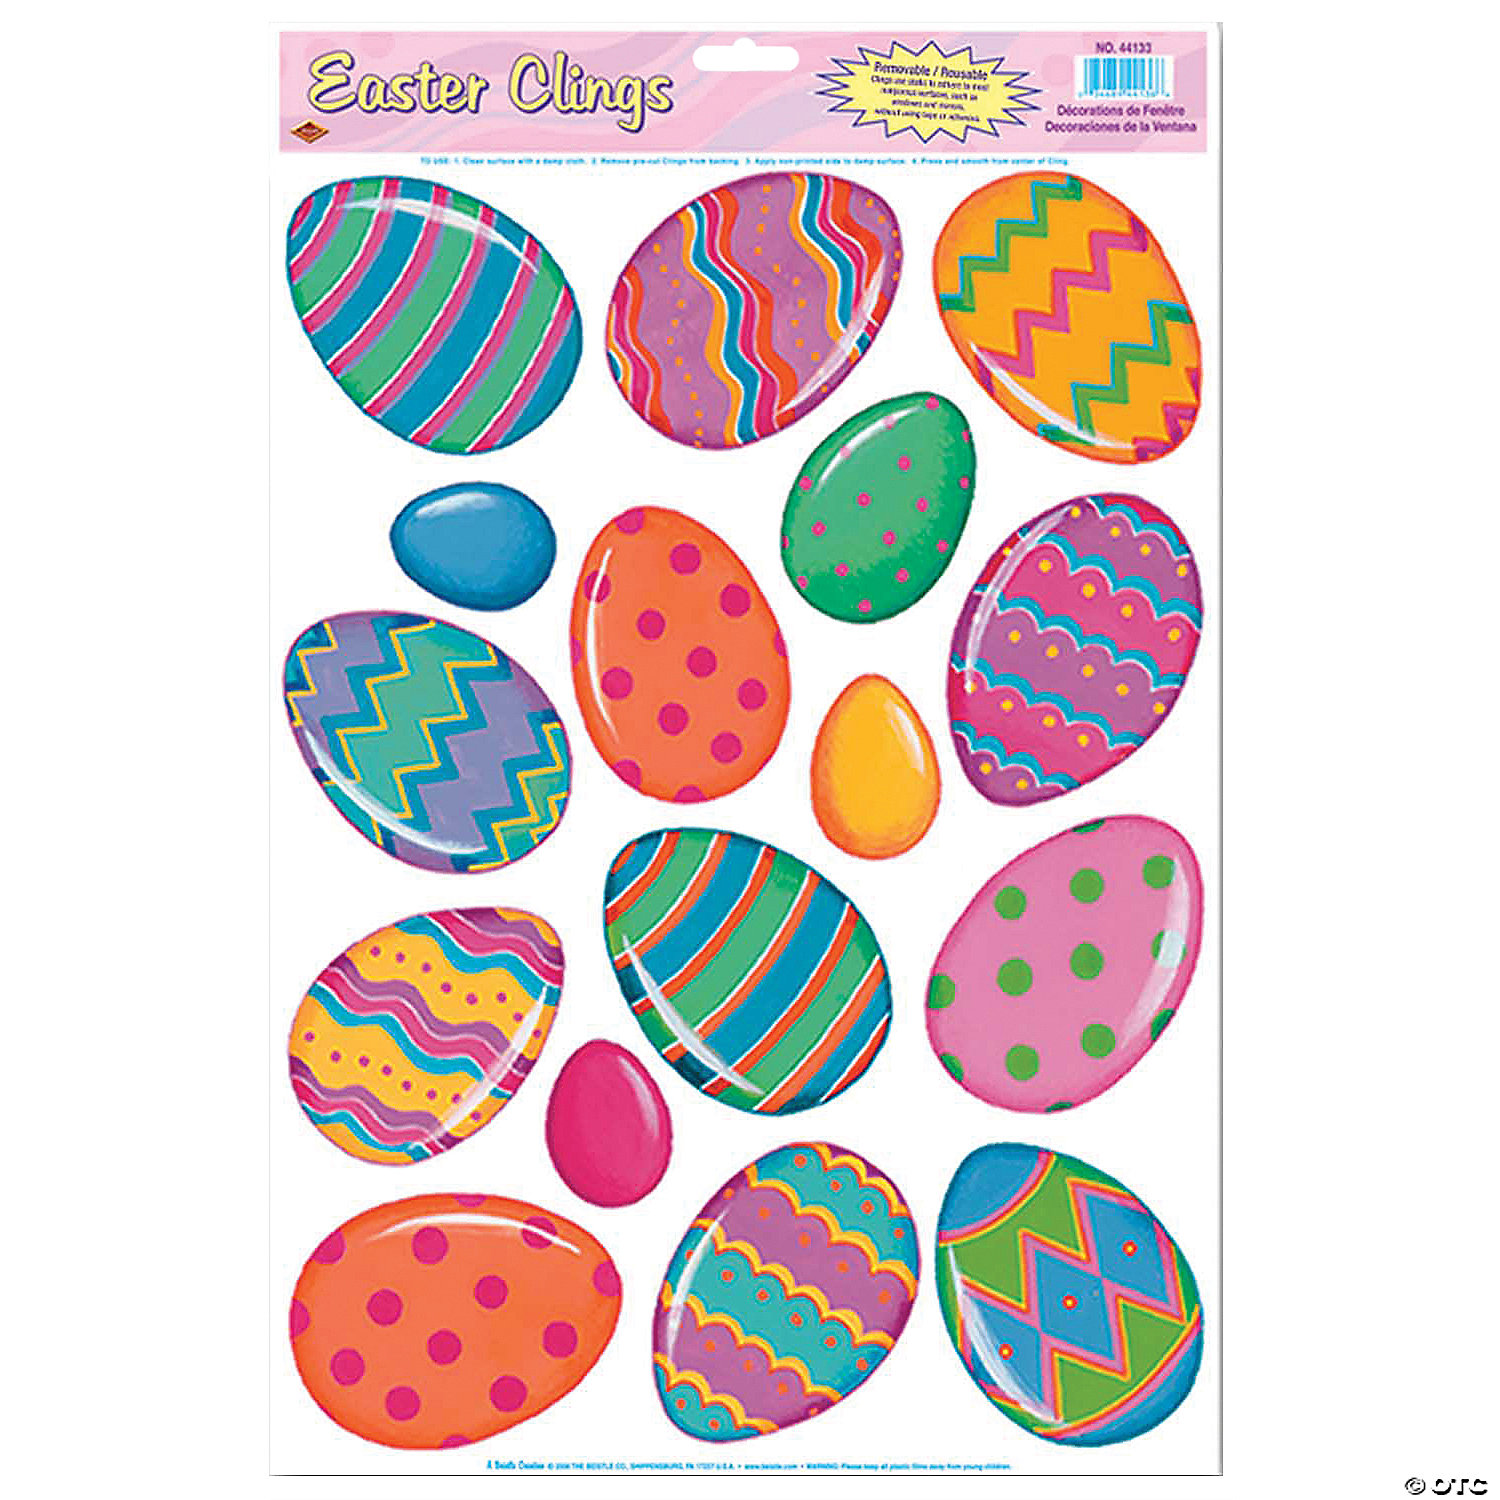 BRIGHT EGG WINDOW CLINGS - EASTER